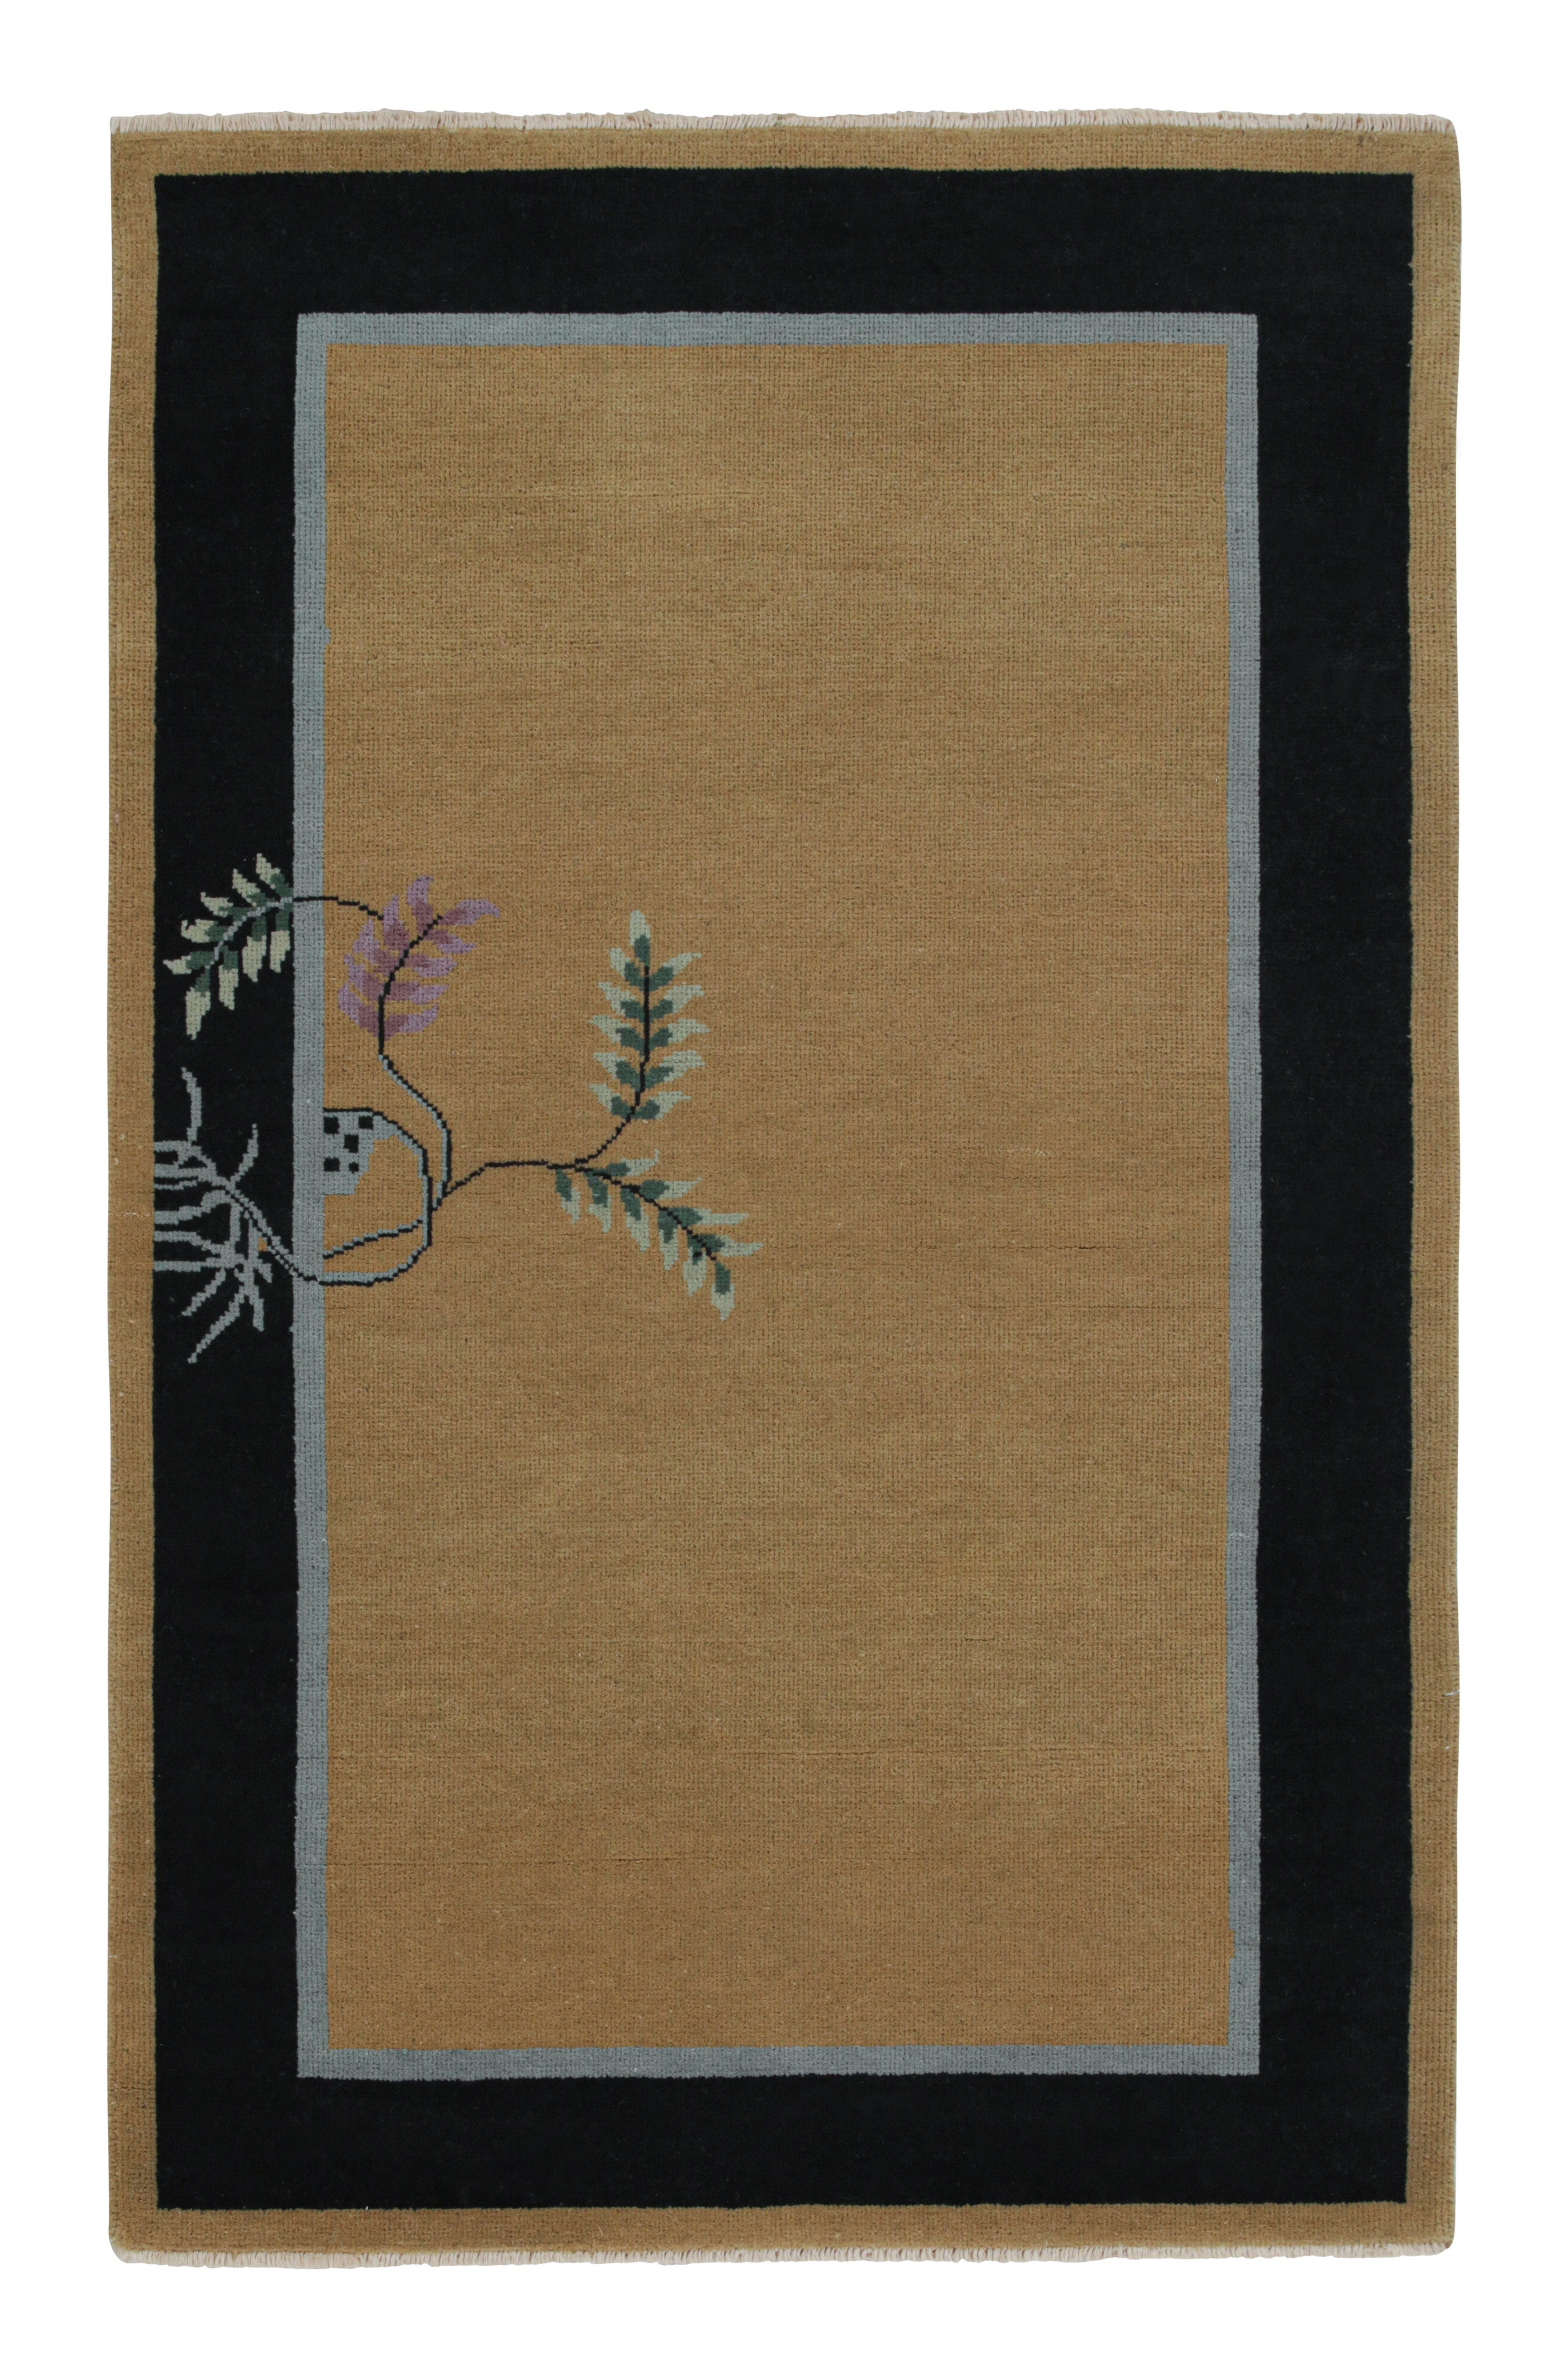 Rug & Kilim’s Chinese Art Deco Style Rug with Camel Field and Blue Border